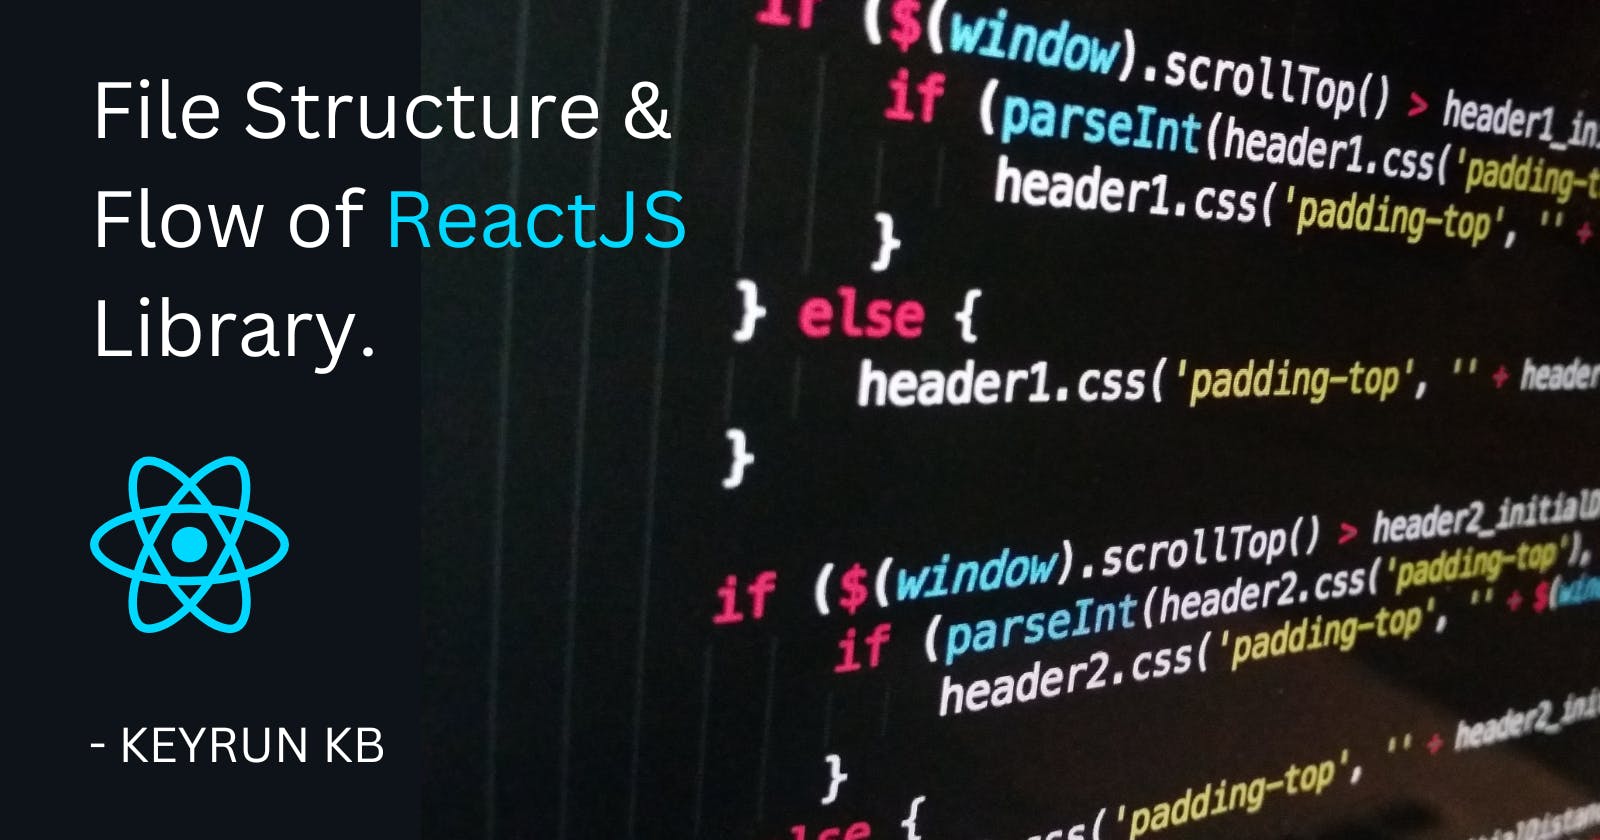 File Structure & Flow of ReactJS Library